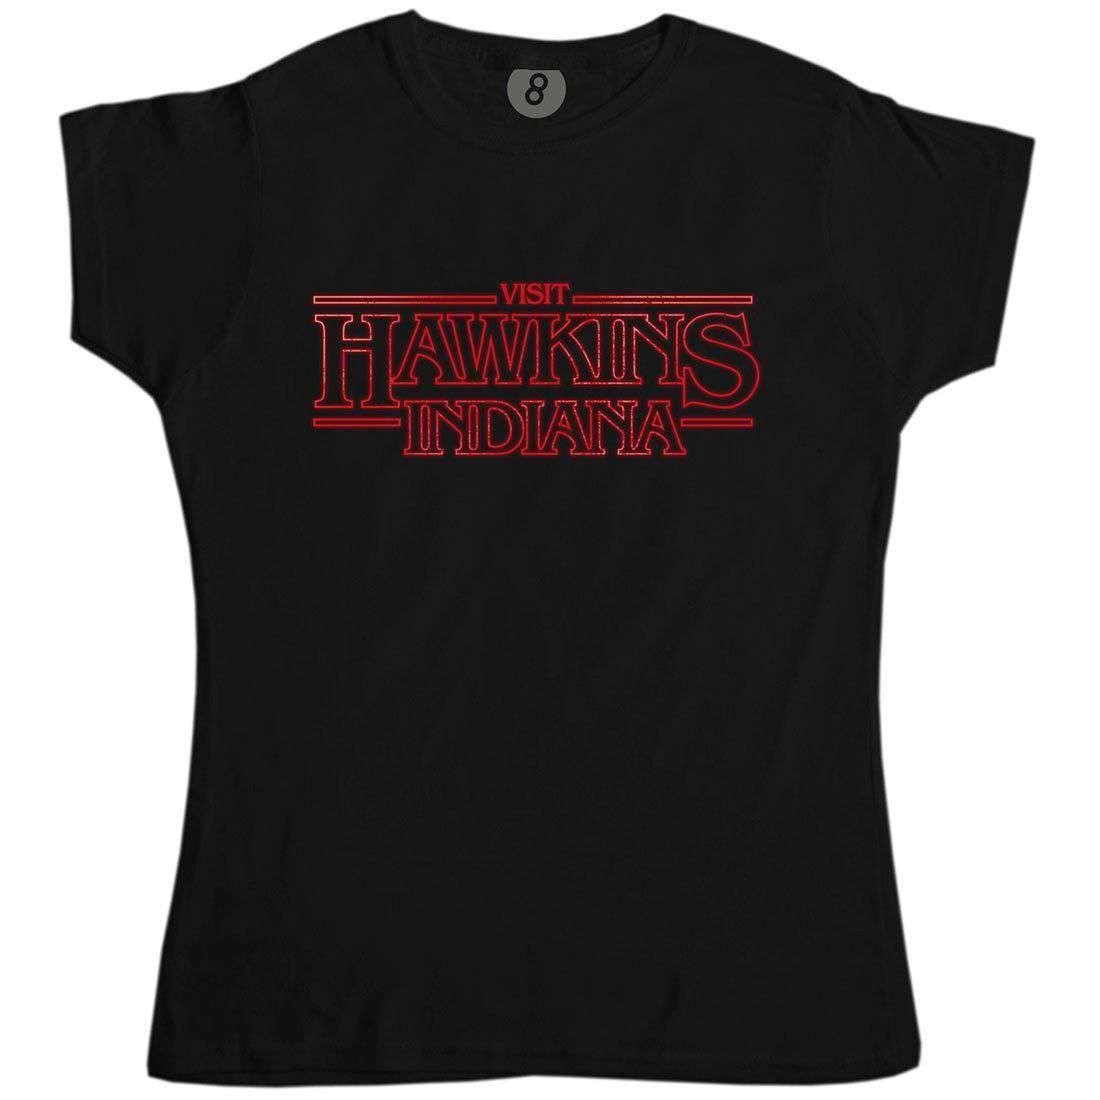 Visit Hawkins Indiana Fitted Womens T-Shirt 8Ball